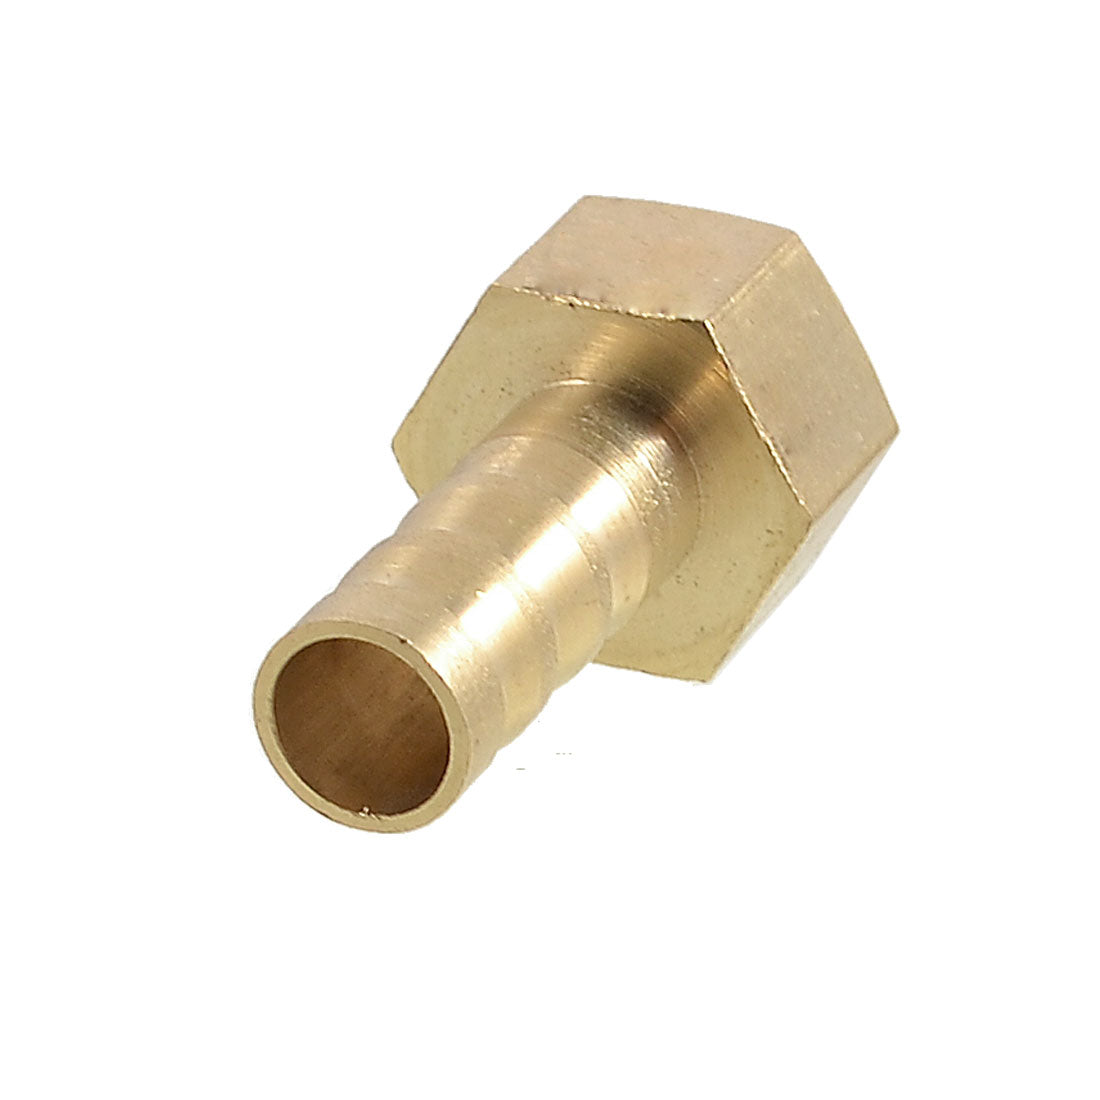 uxcell Uxcell Pneumatic Fitting 1/4BSPT Female Thread Hose Dia Brass Tubing Connector Adapter